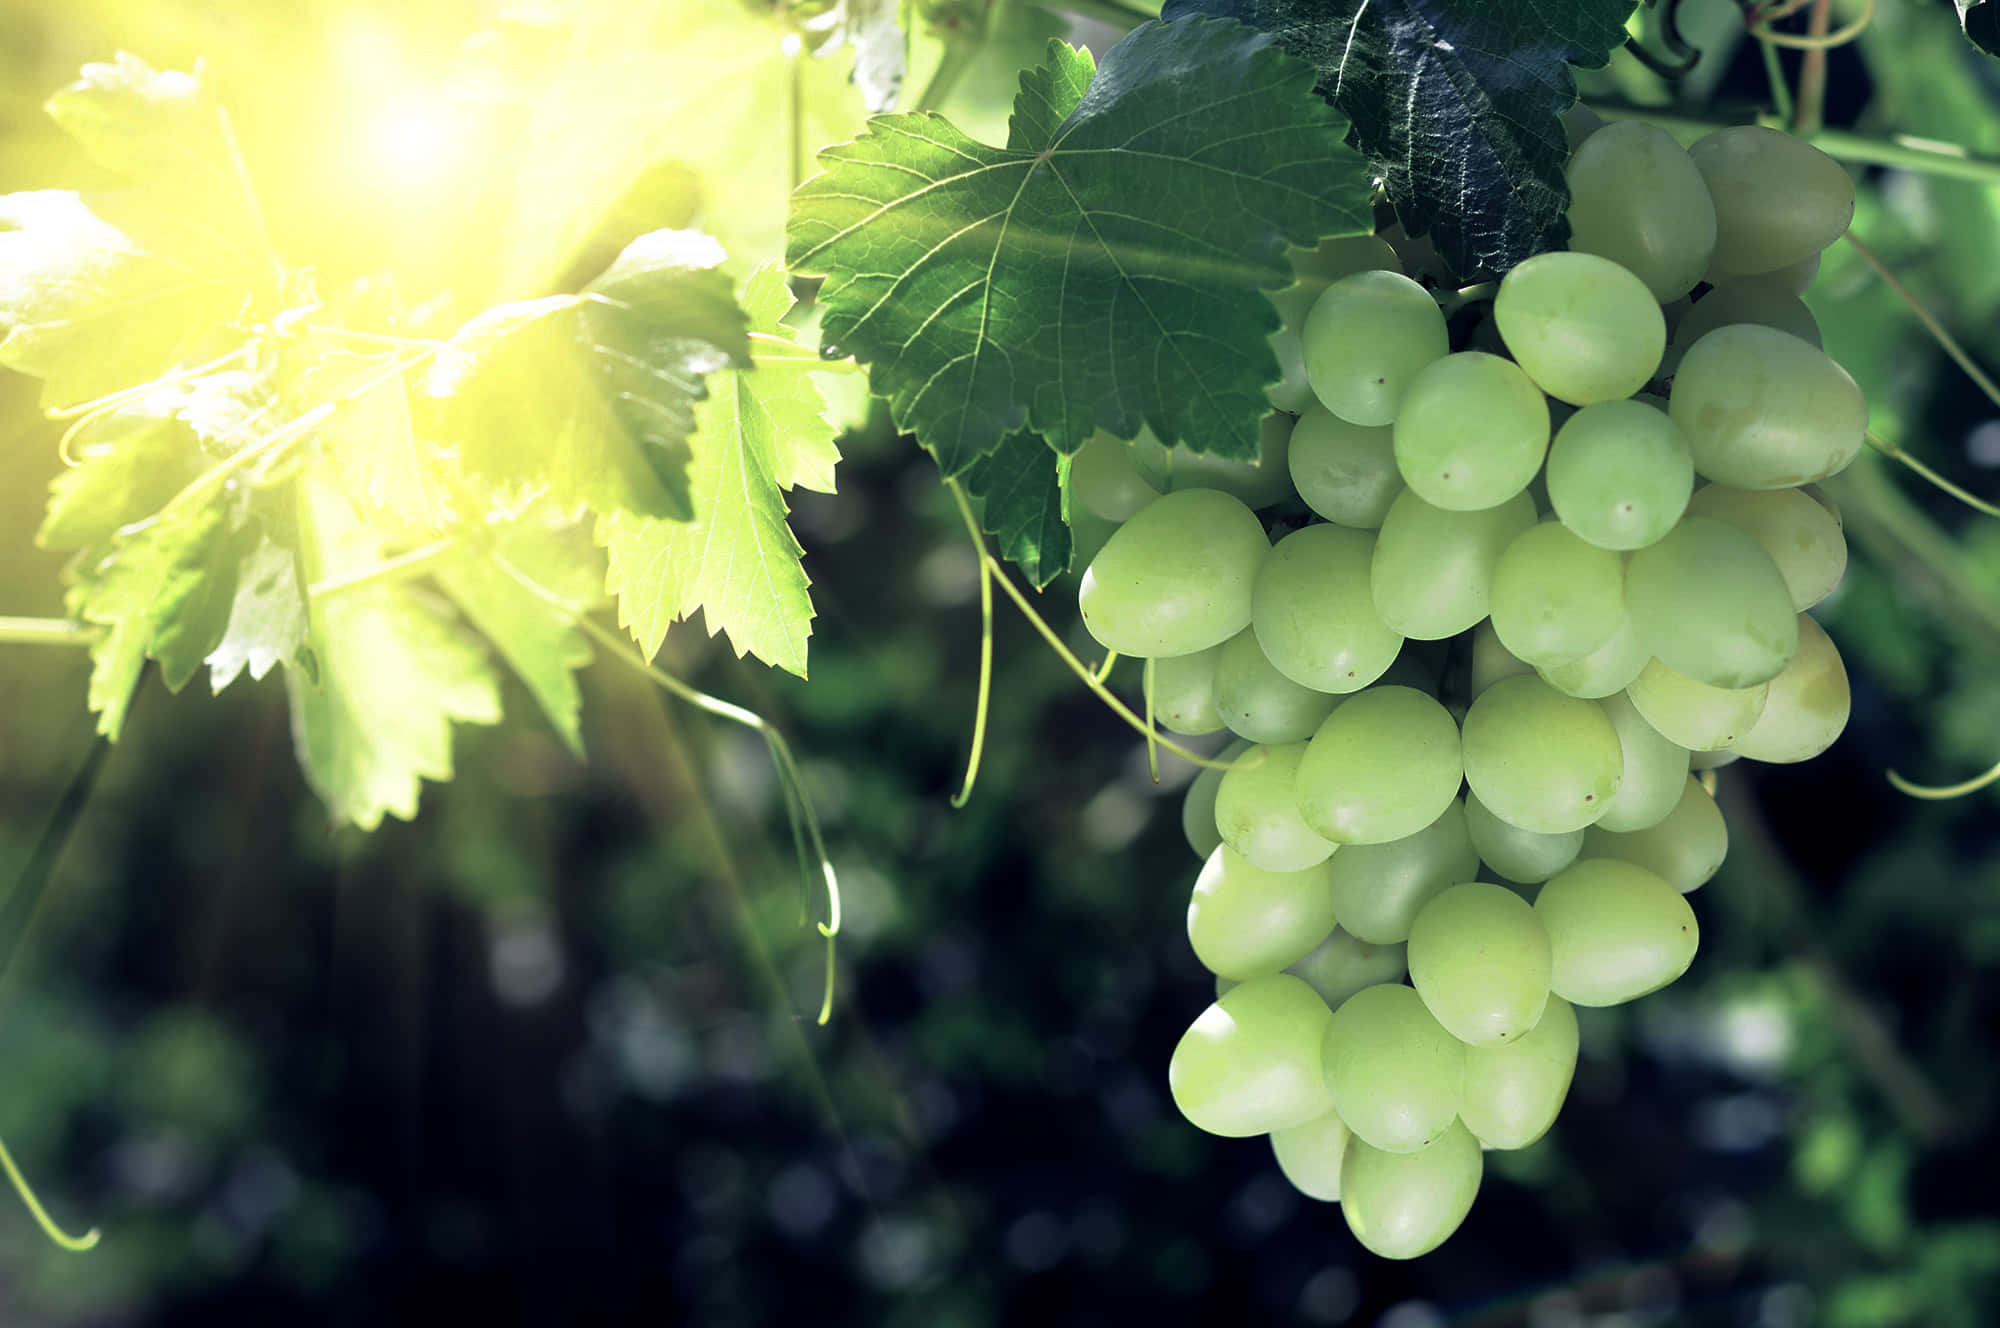 A bunch of grapes hanging on the vine